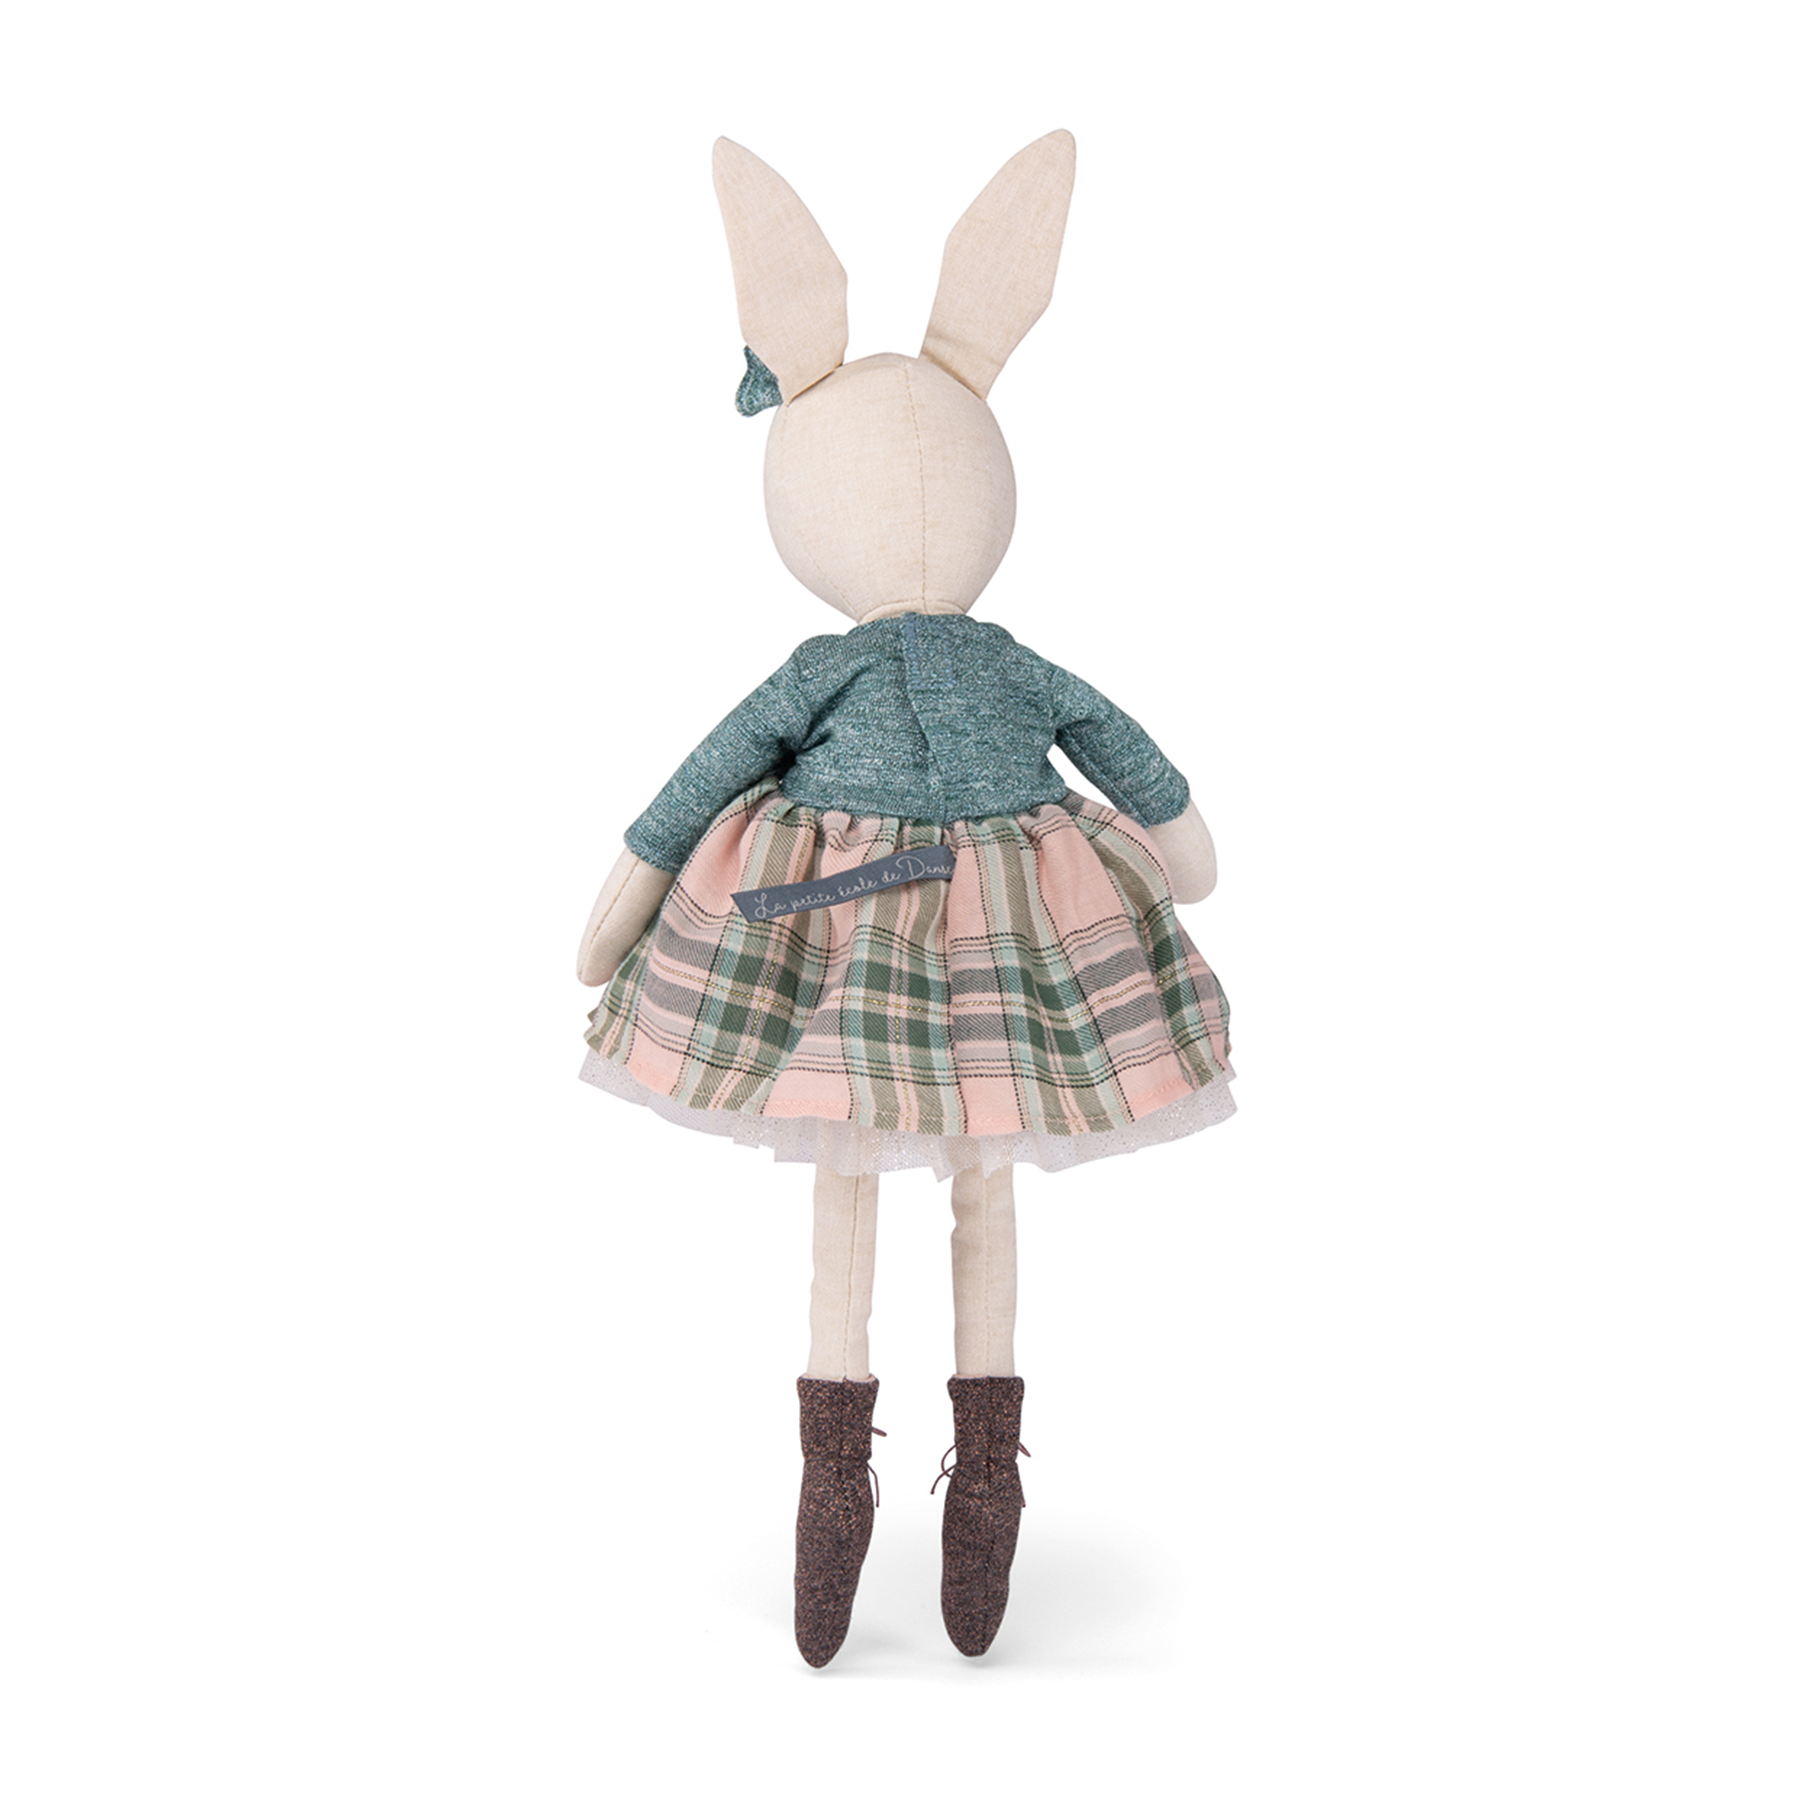 Victorine, a lovely ballerina soft toy rabbit. She is wearing a checked dress with sparkly netting with long legs and soft brown ballet pumps. She has embroidered features,  little pink rosy checks and a little bunny tail.